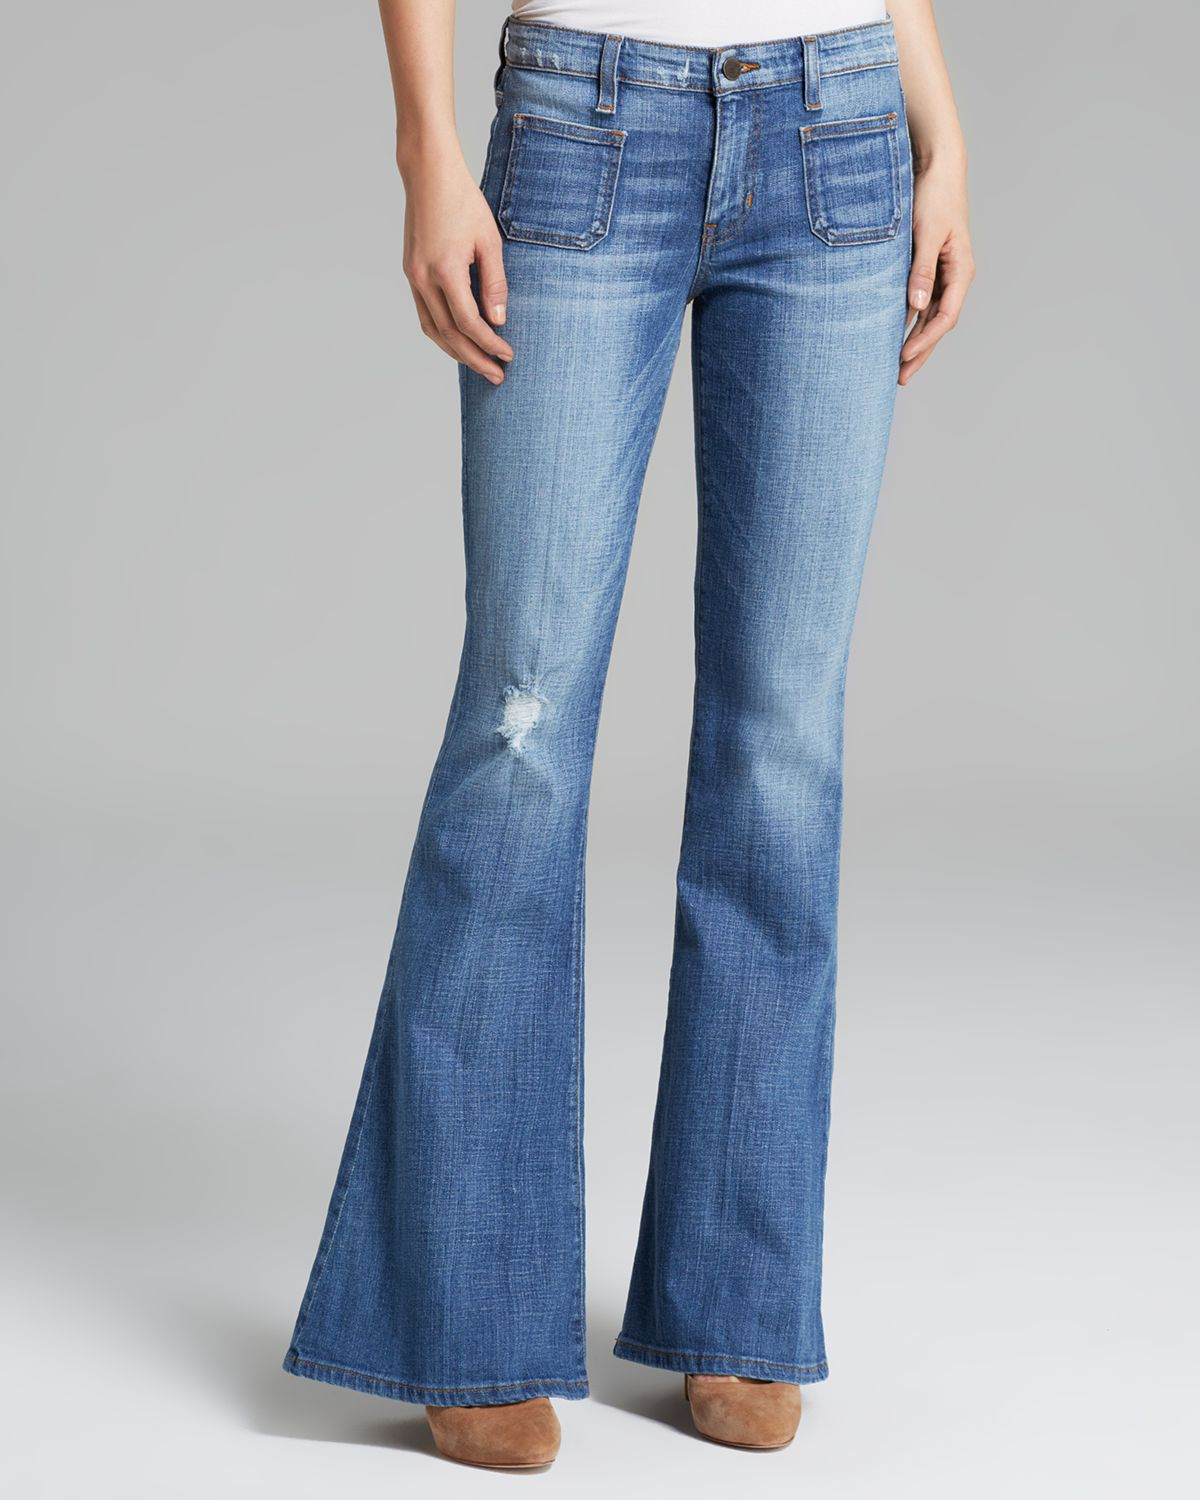 Guess Jeans 70s Flare in Rossen Wash in Blue | Lyst